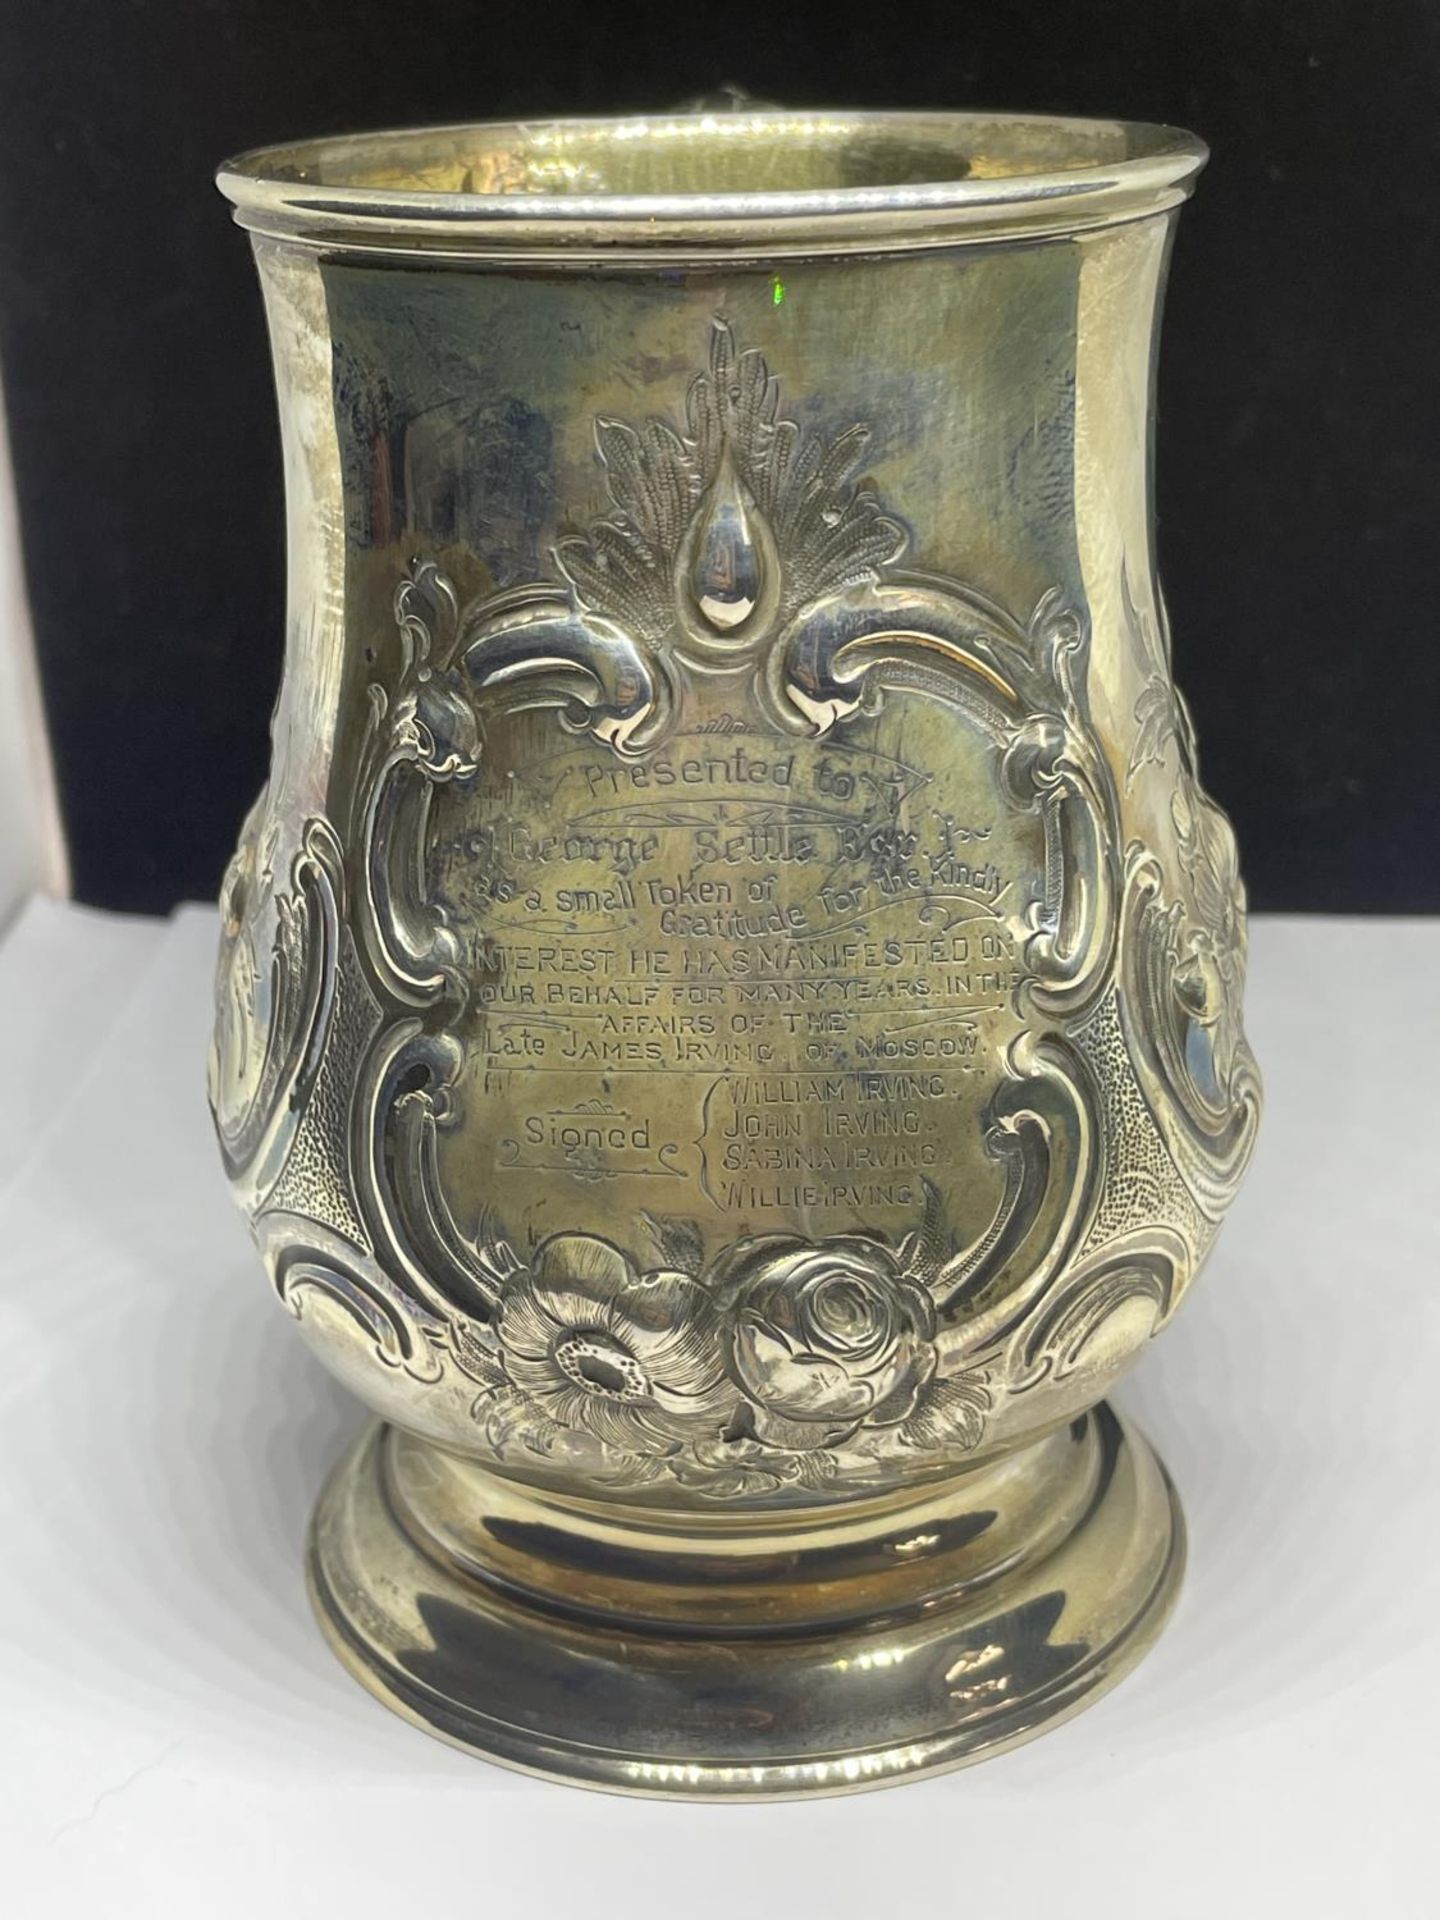 A HALLMARKED LONDON SILVER DECORATIVE TANKARD GROSS WEIGHT 263.9 GRAMS - Image 2 of 3